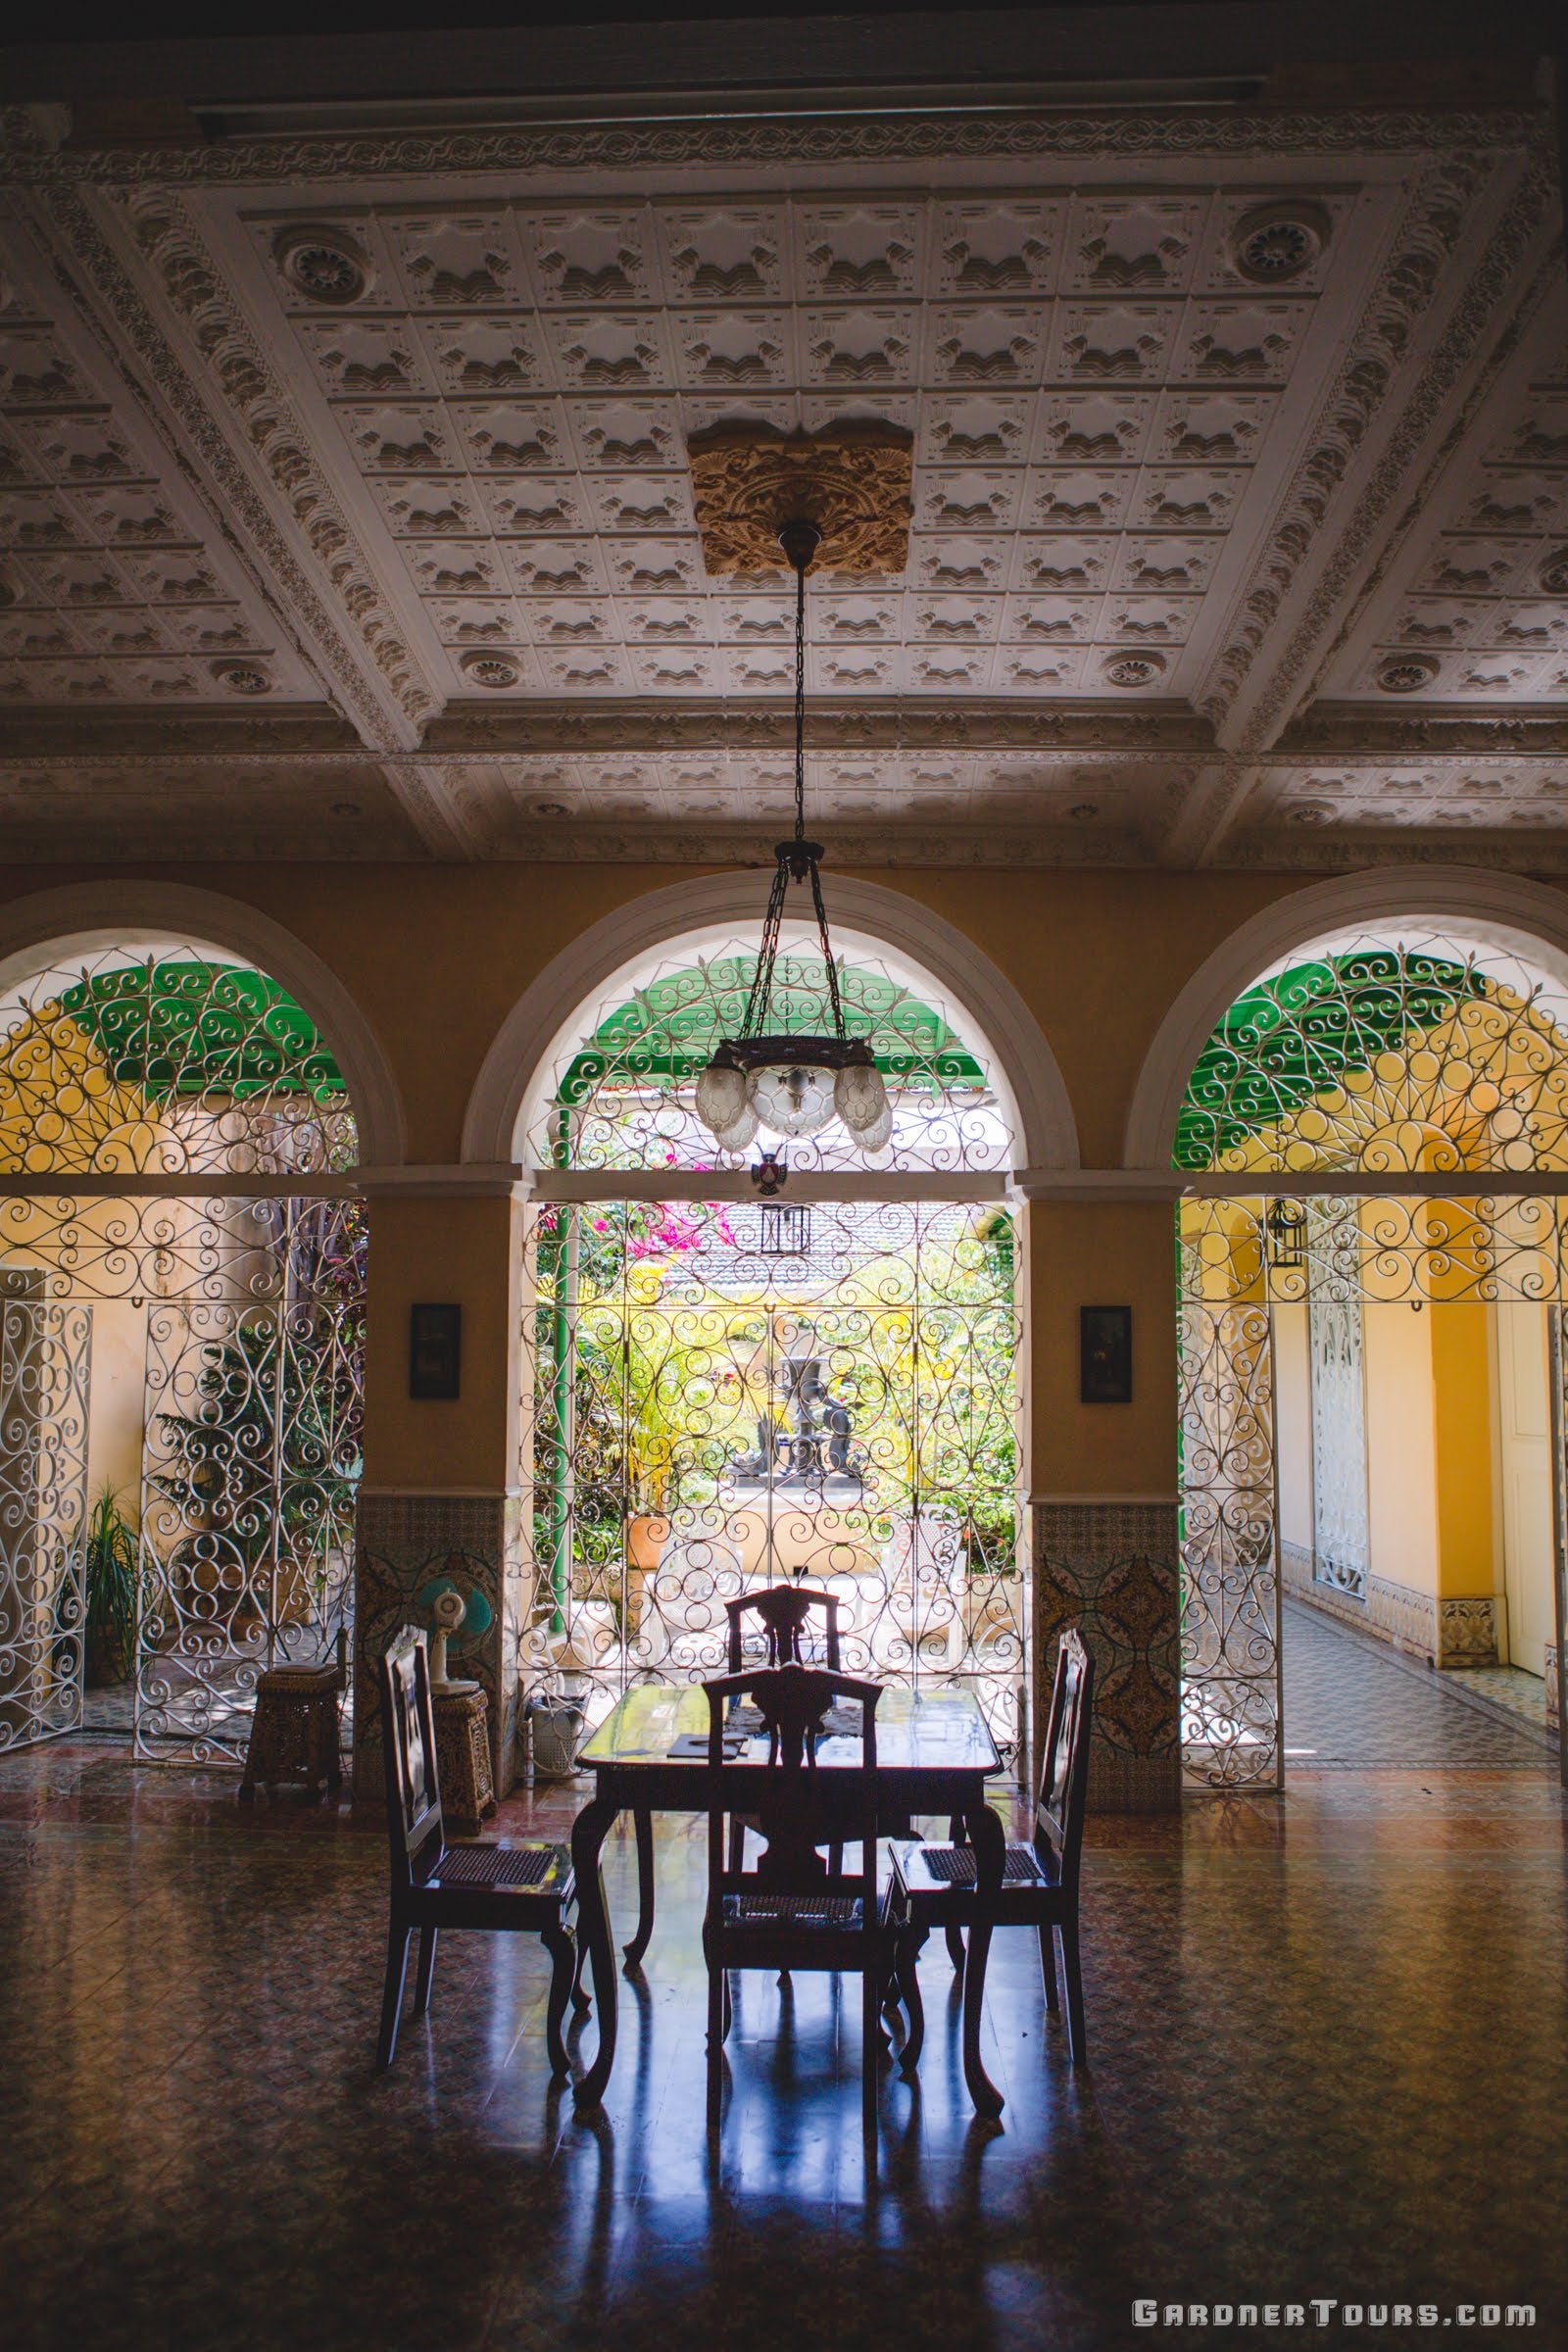 Classic BnB Accommodations with Ornate Iron Works and Beautiful Ceilings at a Casa Particular BnB in Trinidad, Cuba